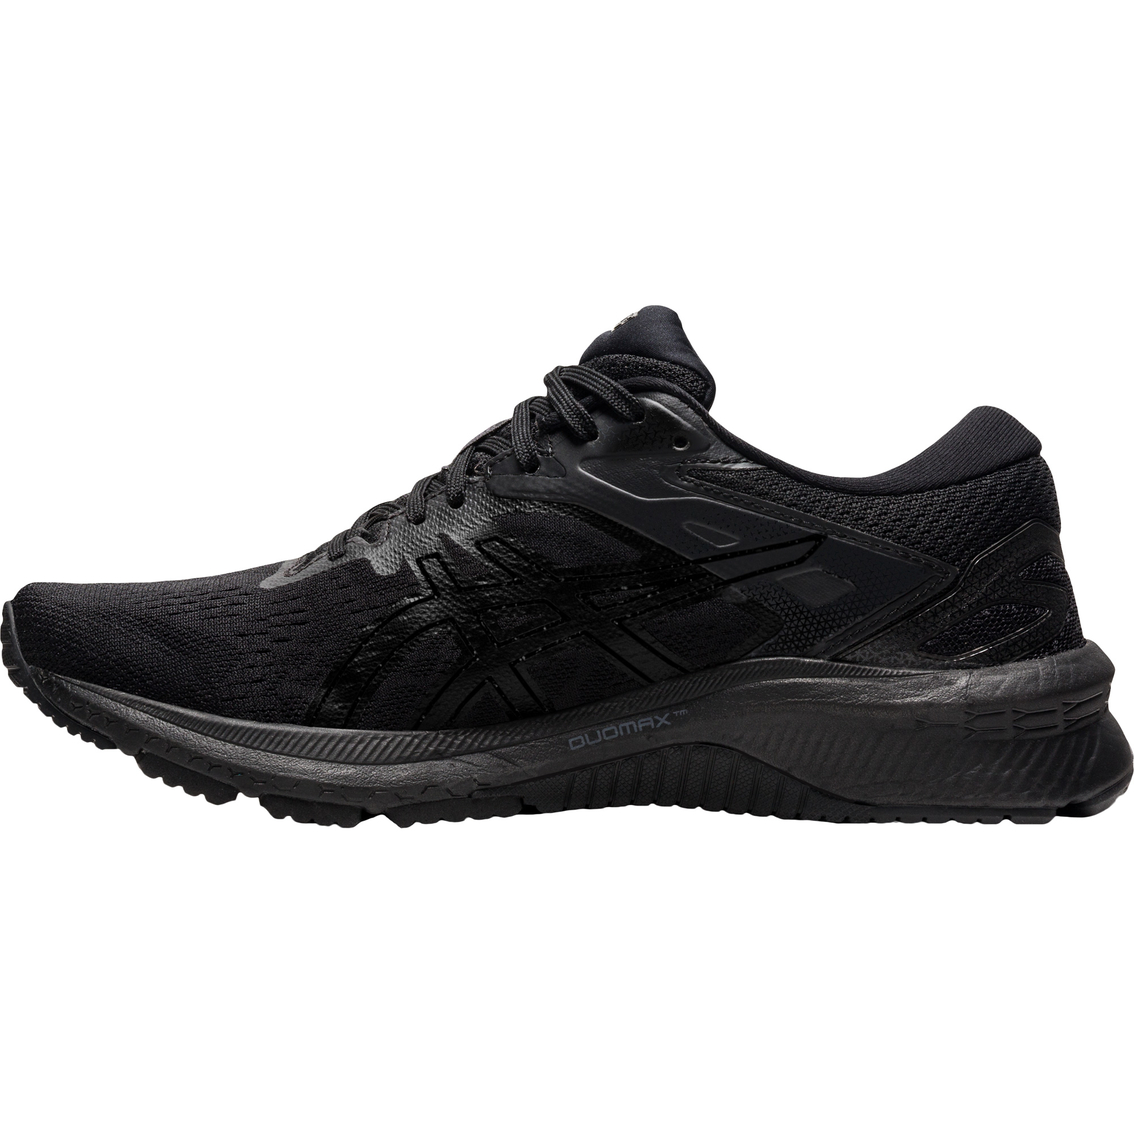 ASICS Women's GT 1000 10 Running Shoes - Image 2 of 7